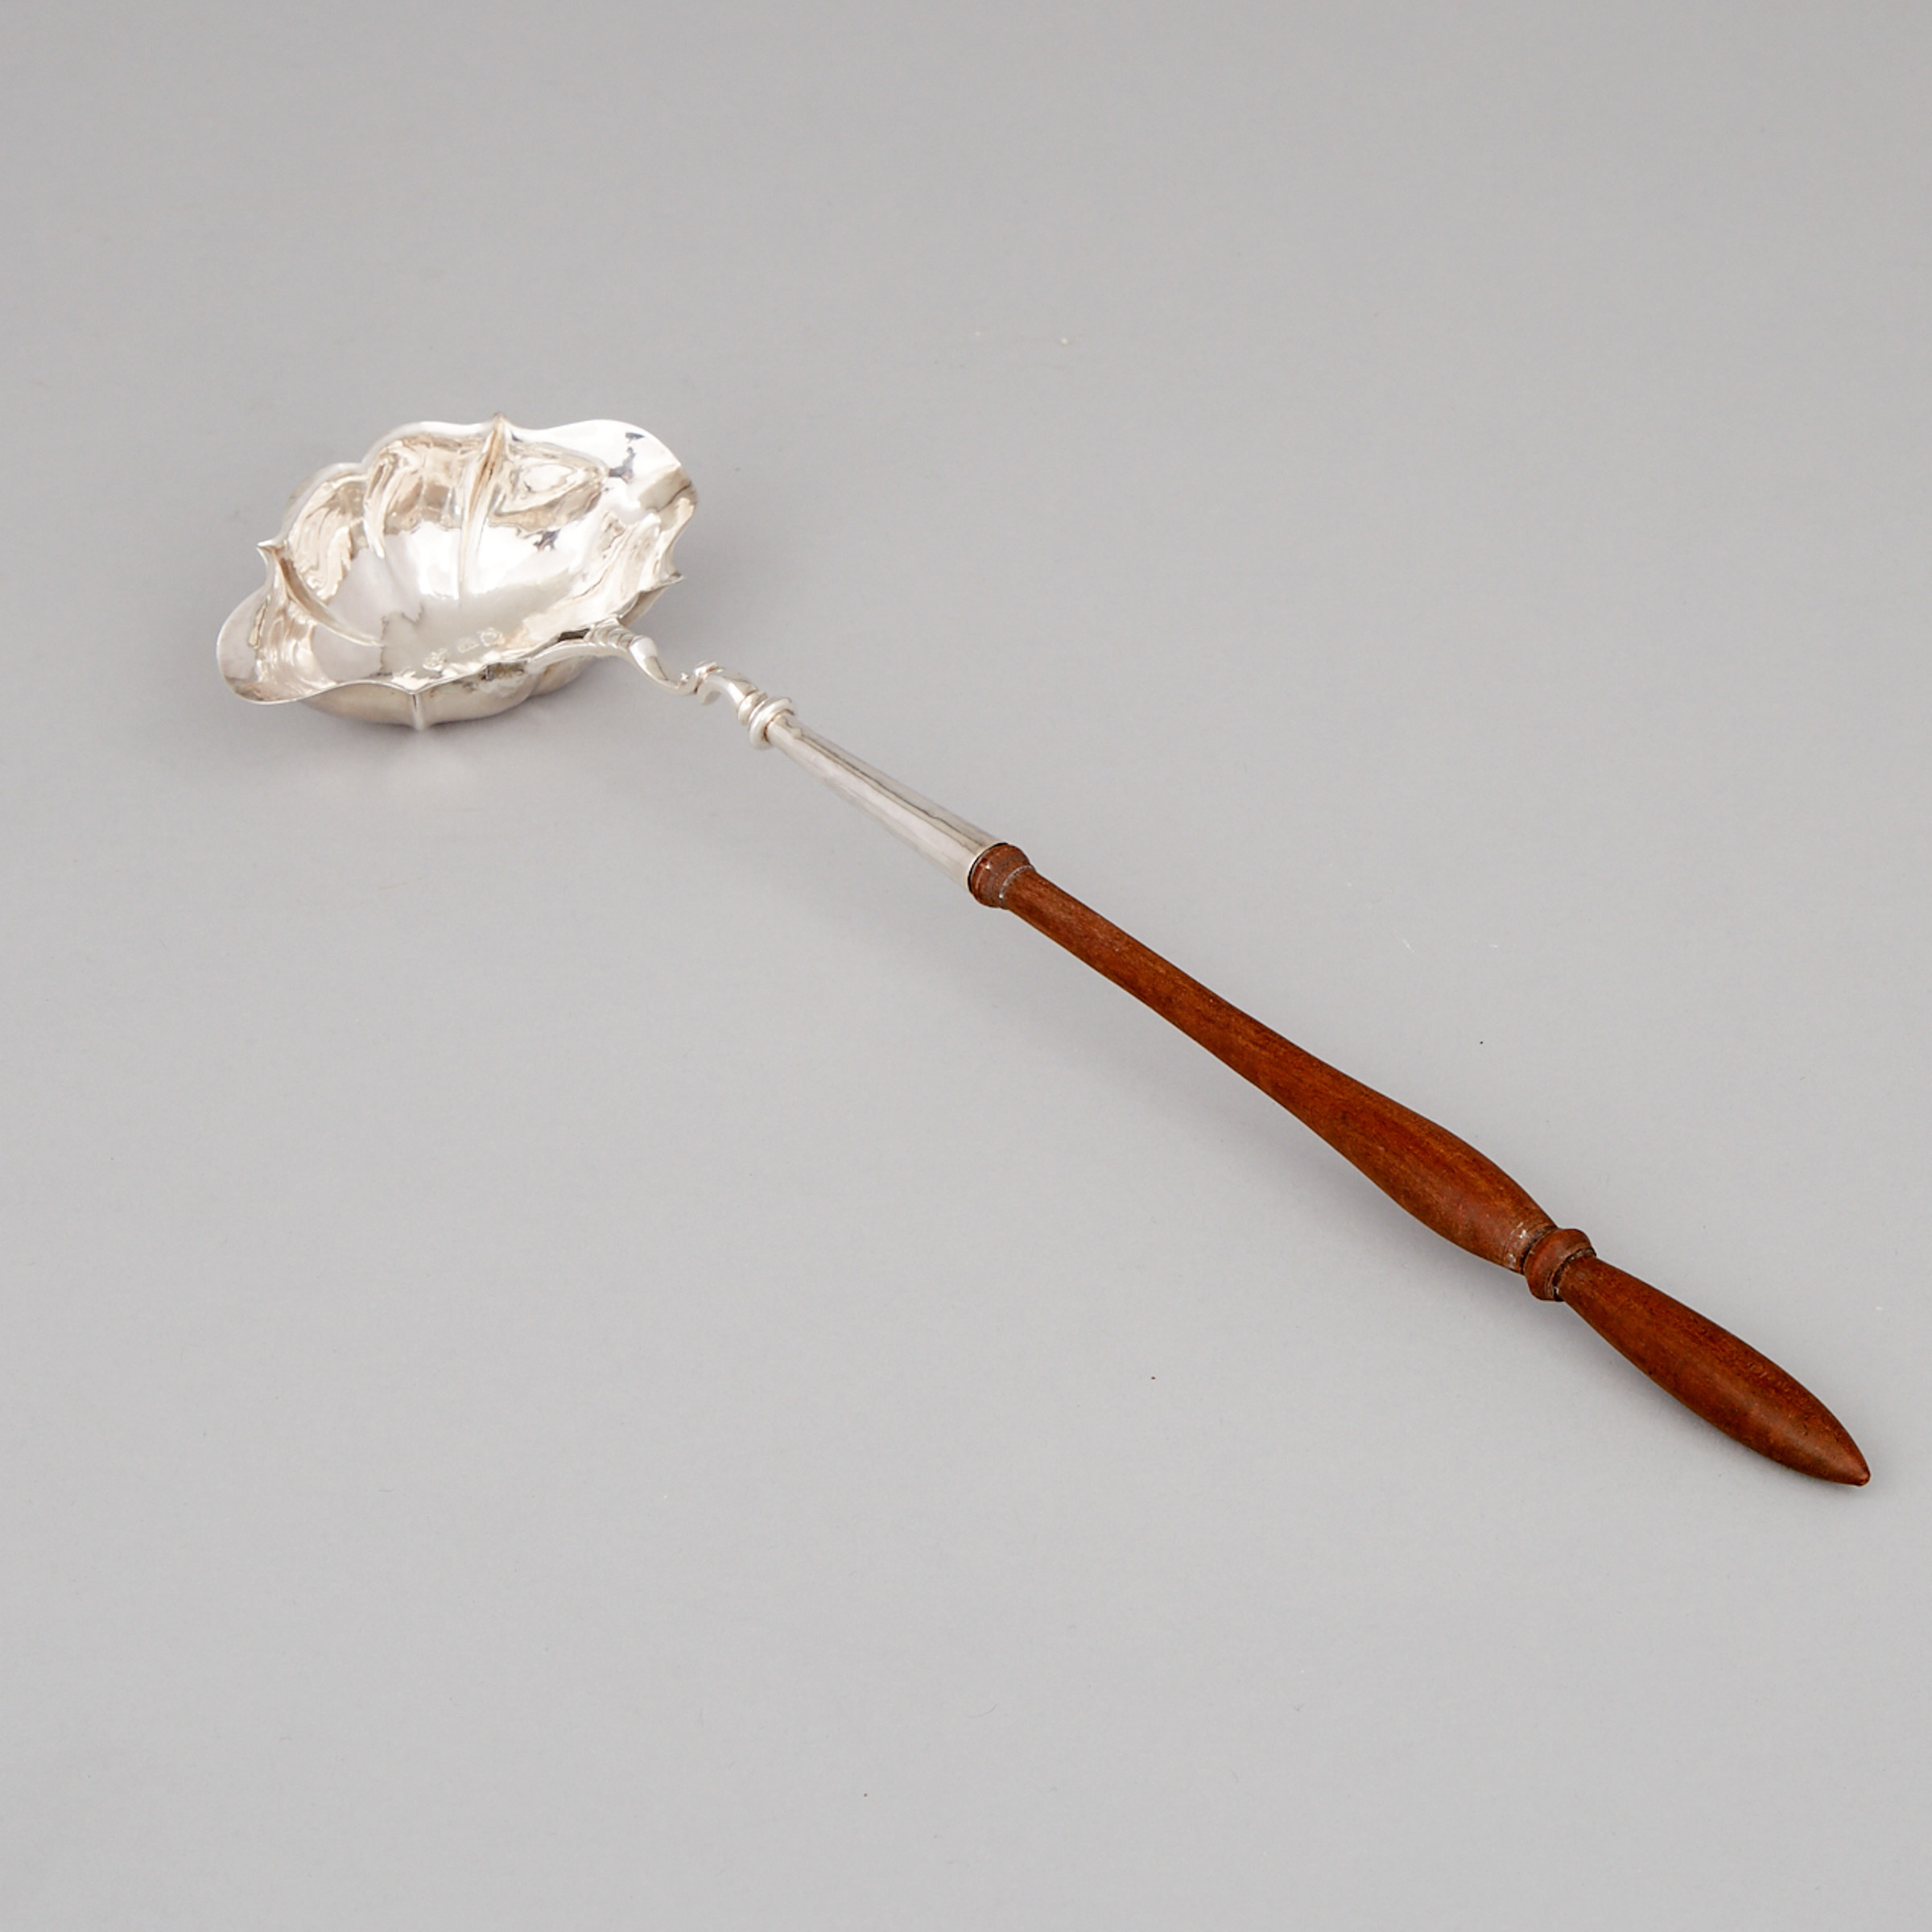 George II Silver Toddy Ladle, David Hennell I, London, 1746